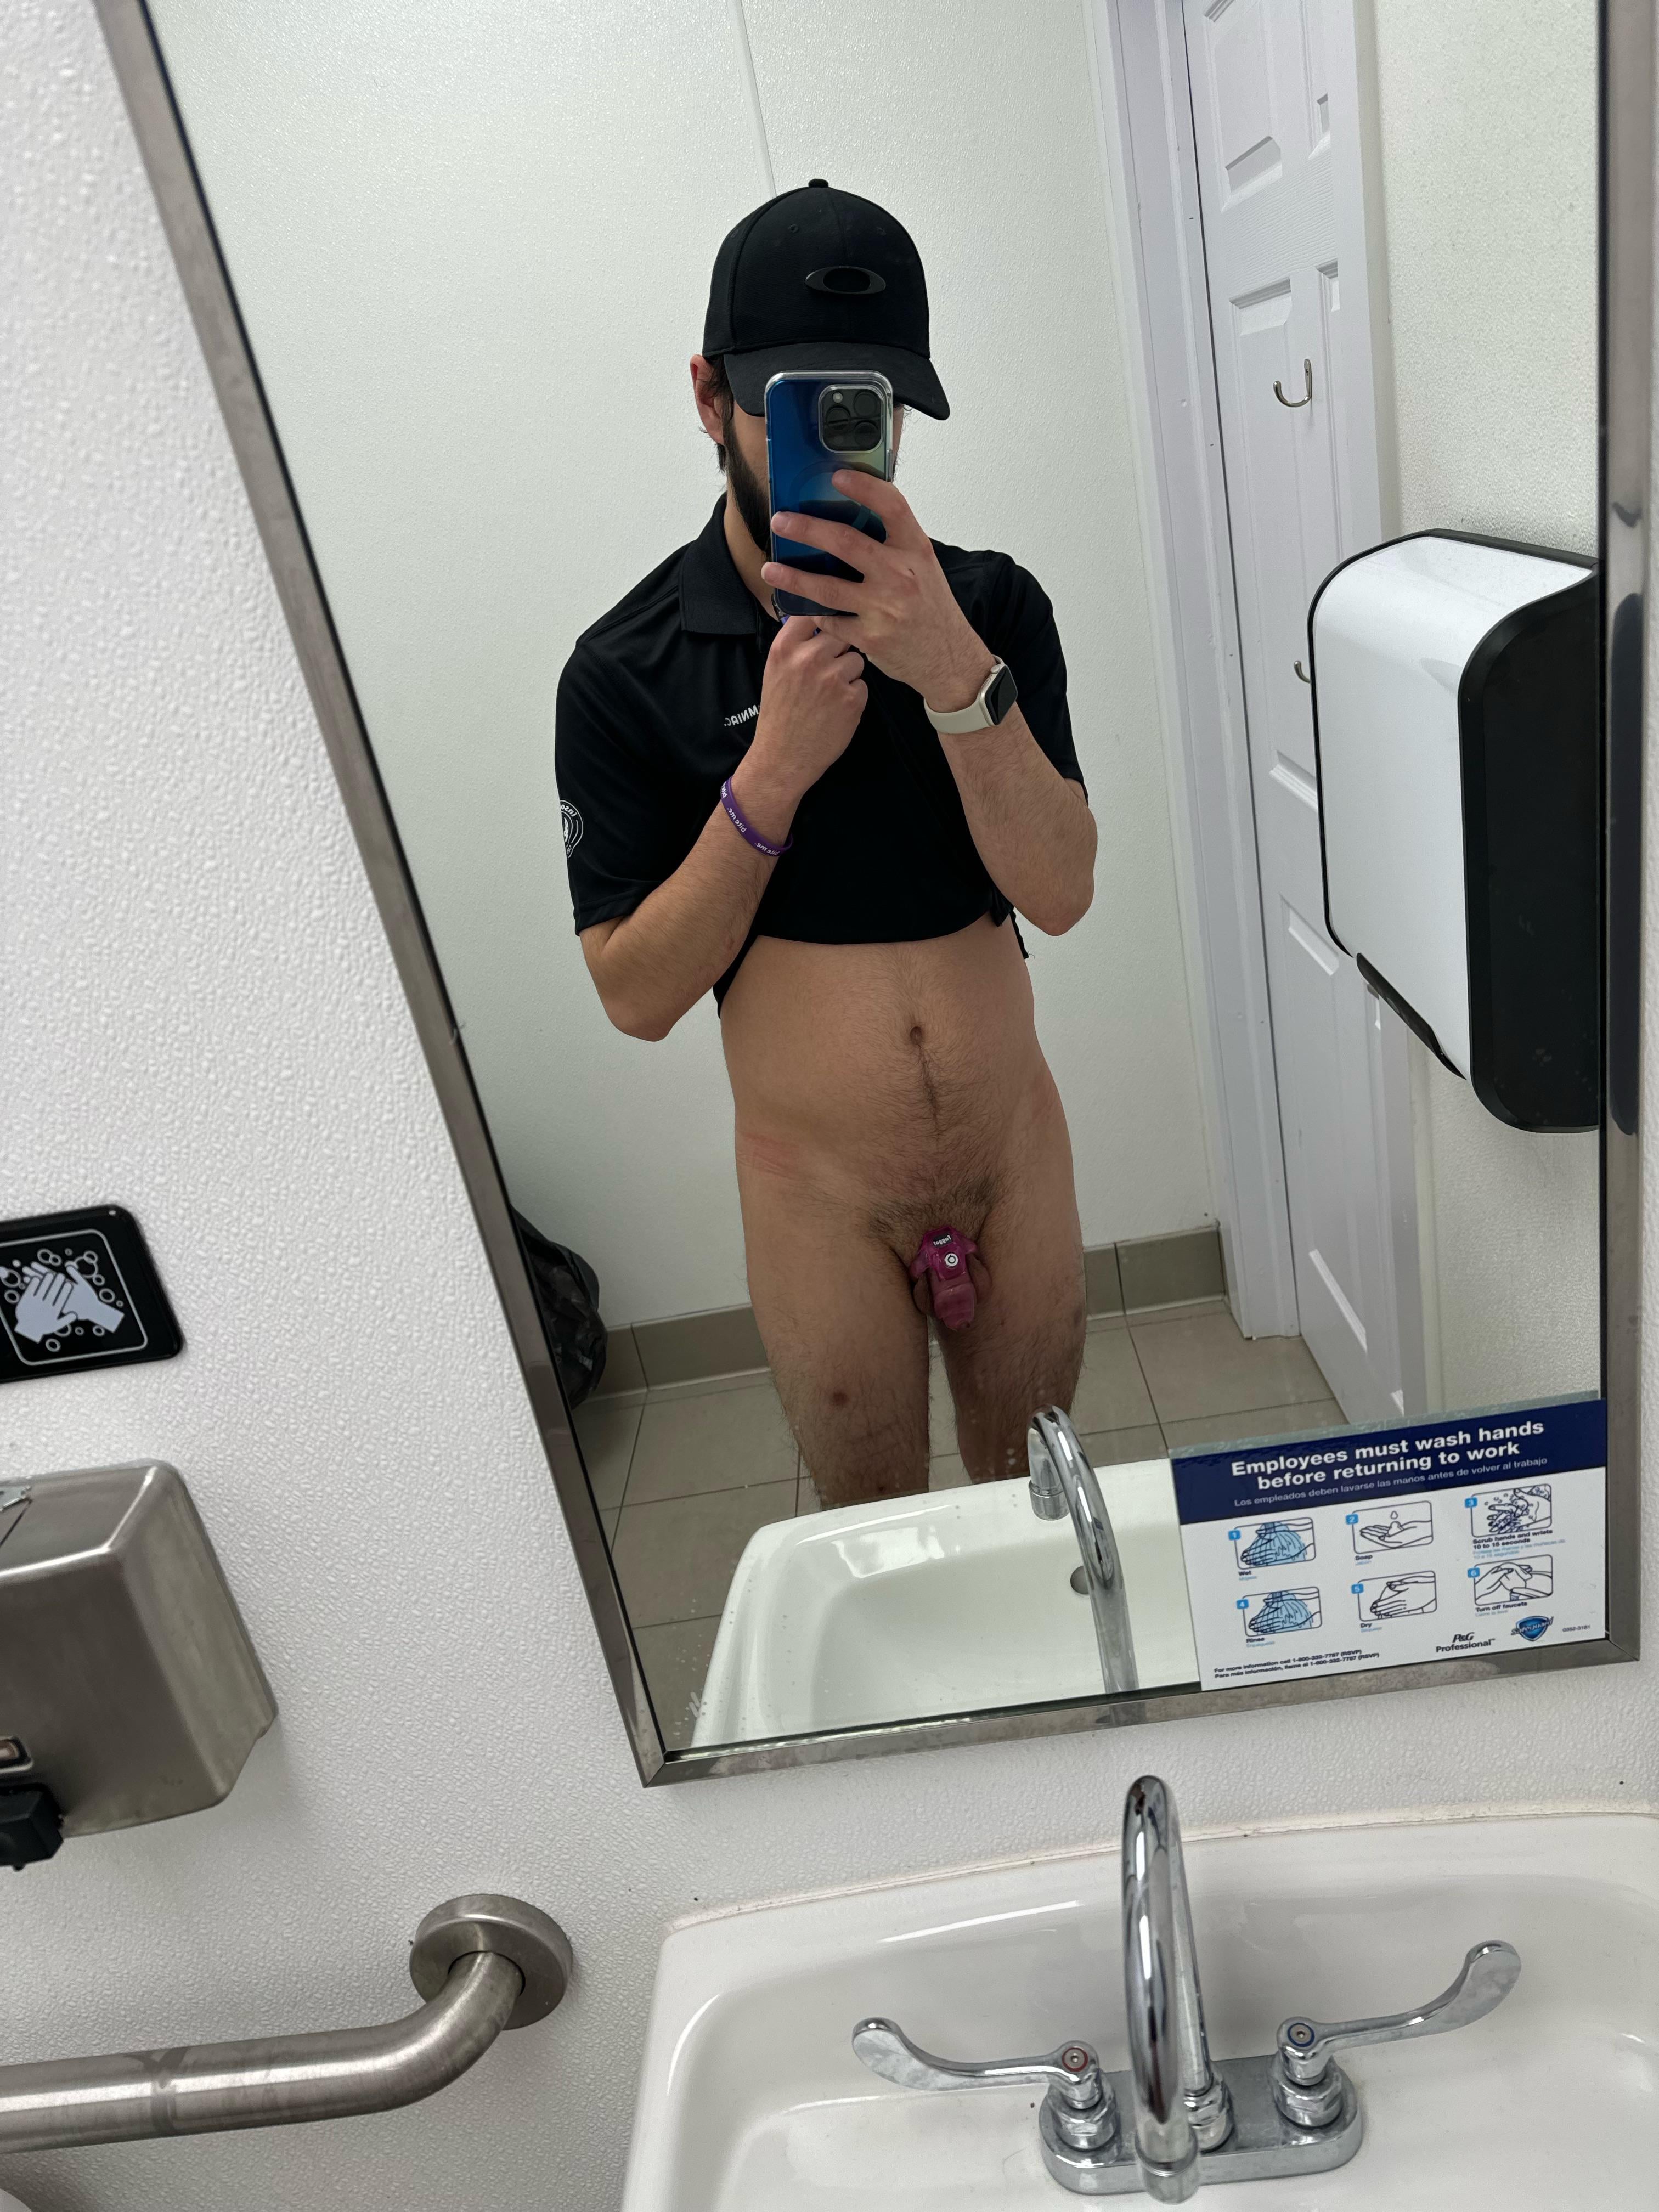 DMs open for some work